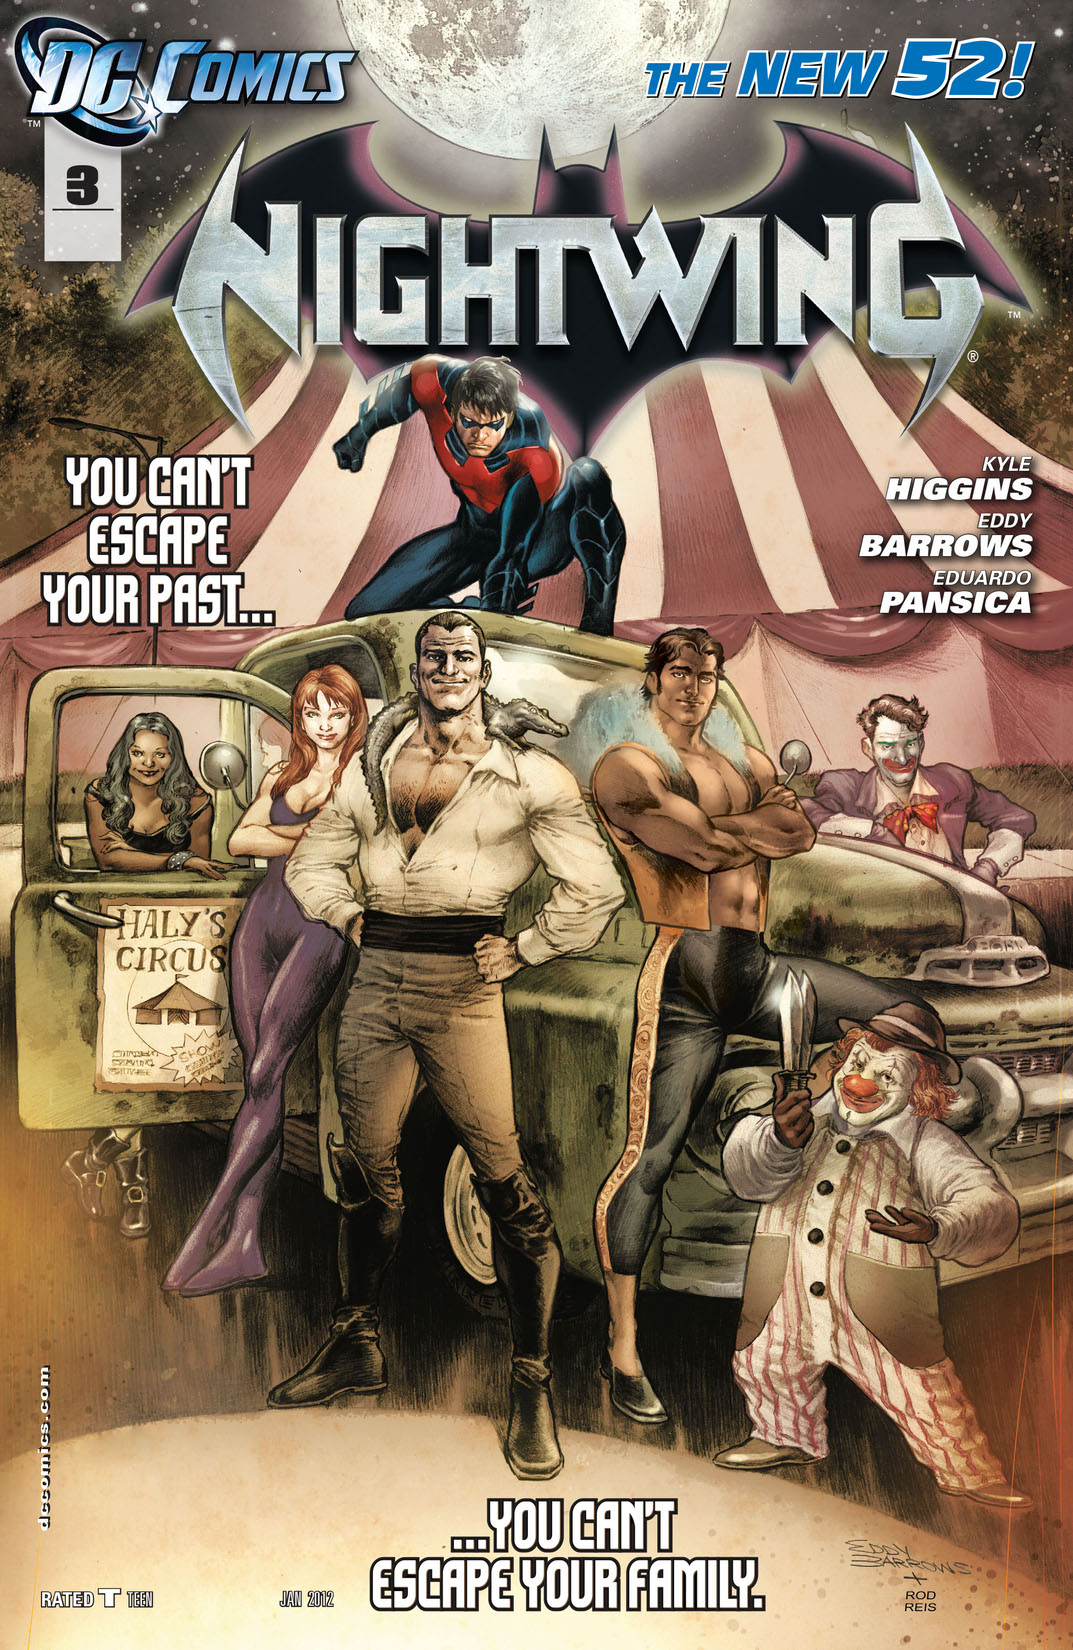 Nightwing (2011-) #3 preview images